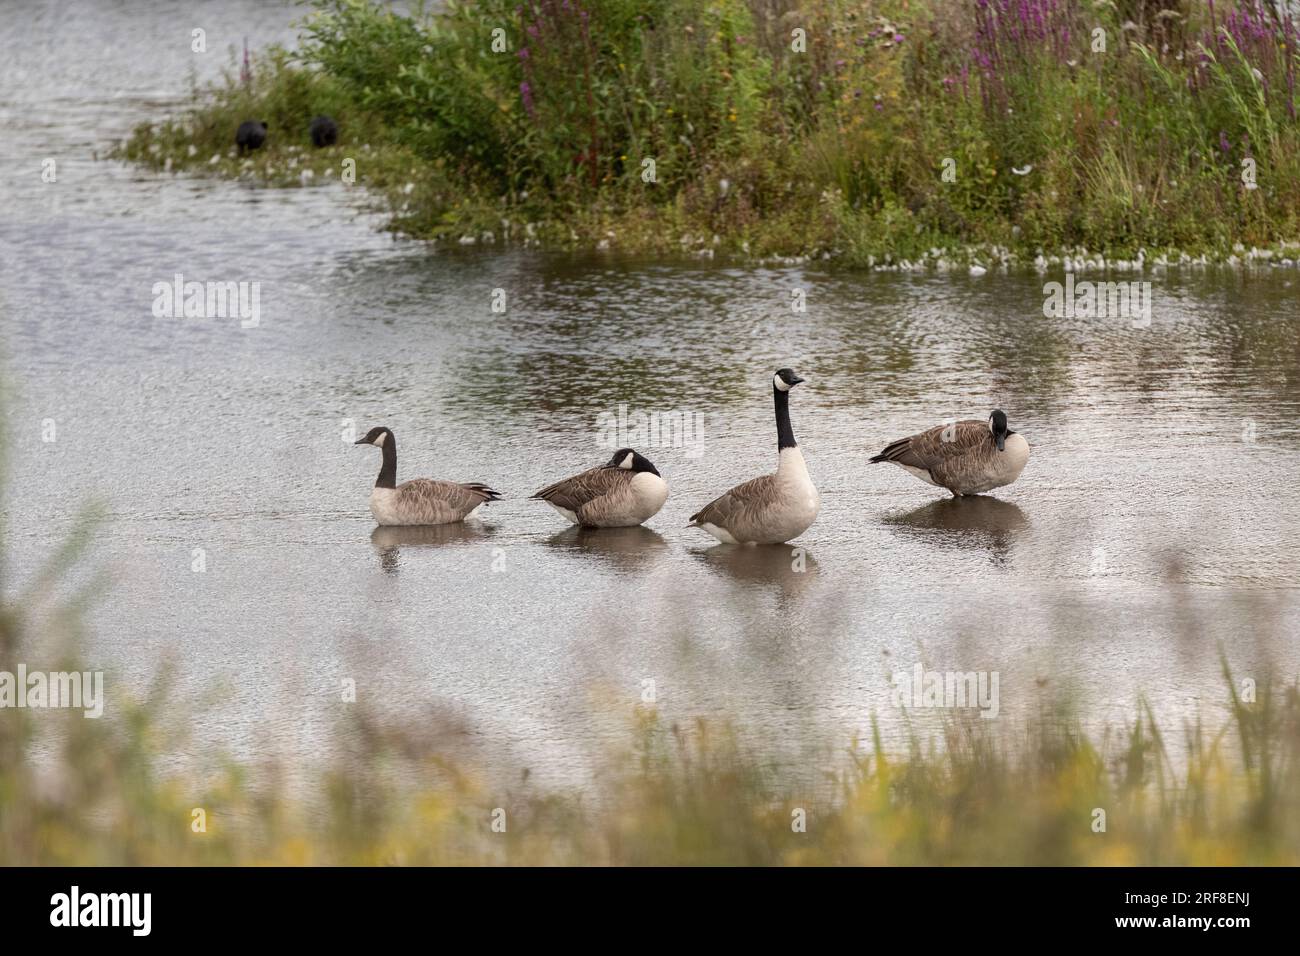 Canadian geese in Kersal wetlands. Floodplain alongside the River Irwell. Salford, Borough of Greater Manchester. Stock Photo